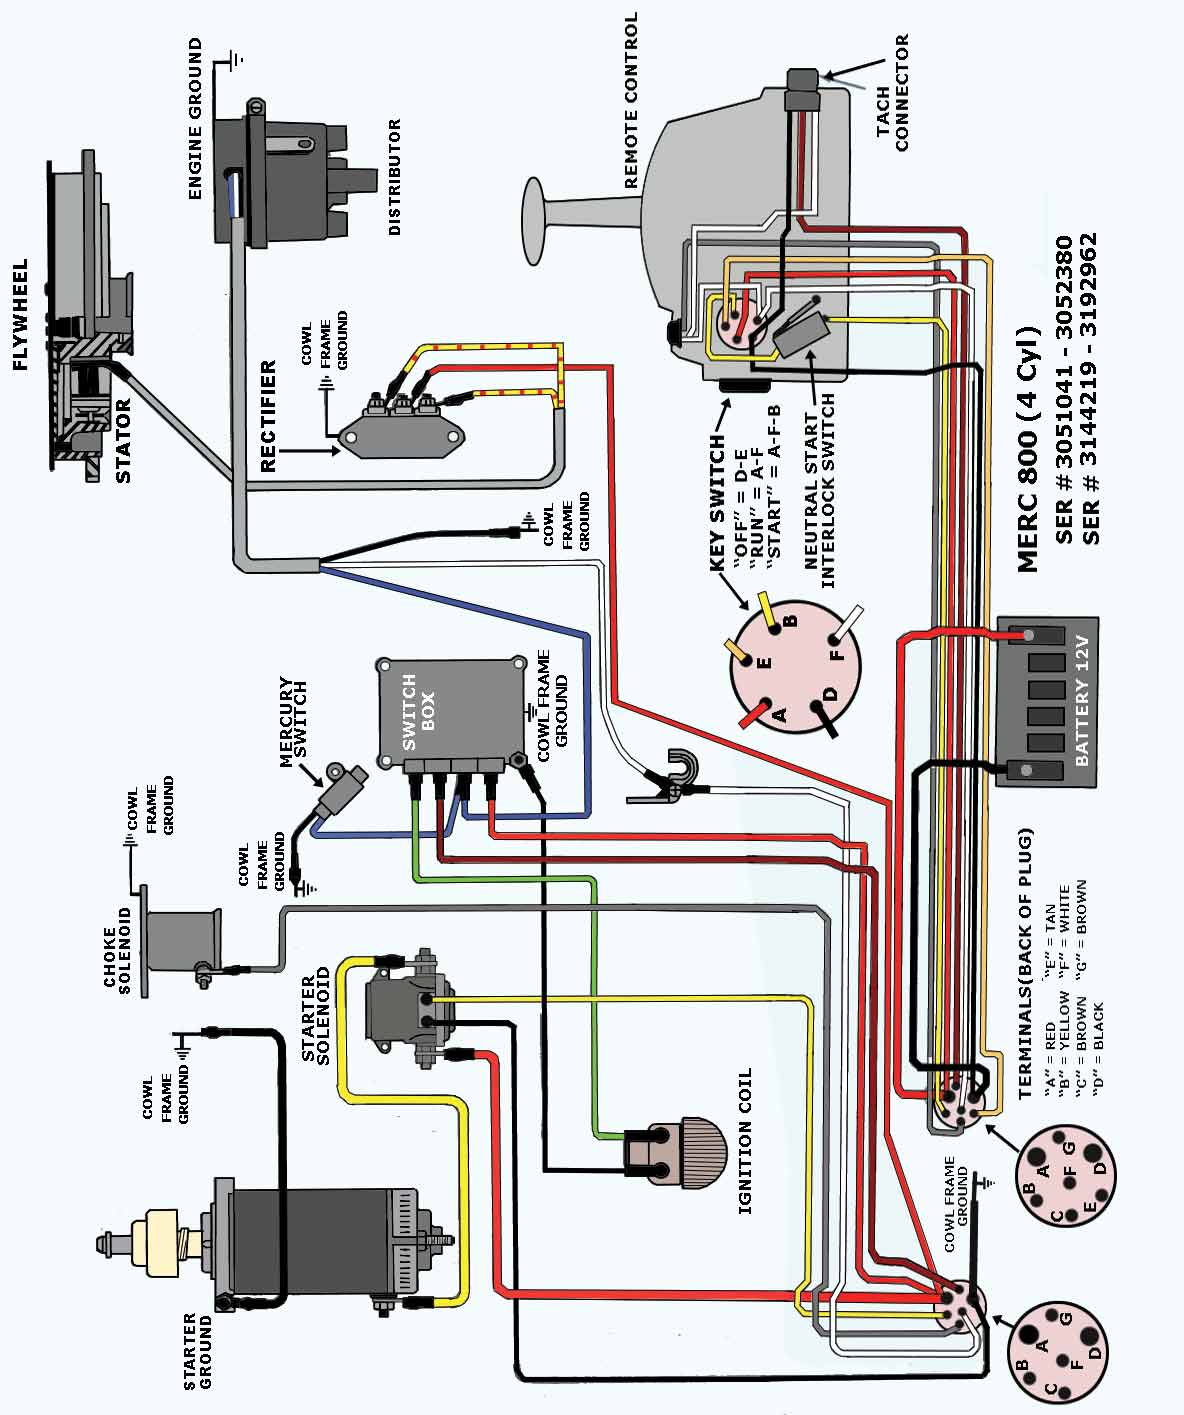 Mercury Outboard Wiring Diagram Ignition Switch from www.maxrules.com